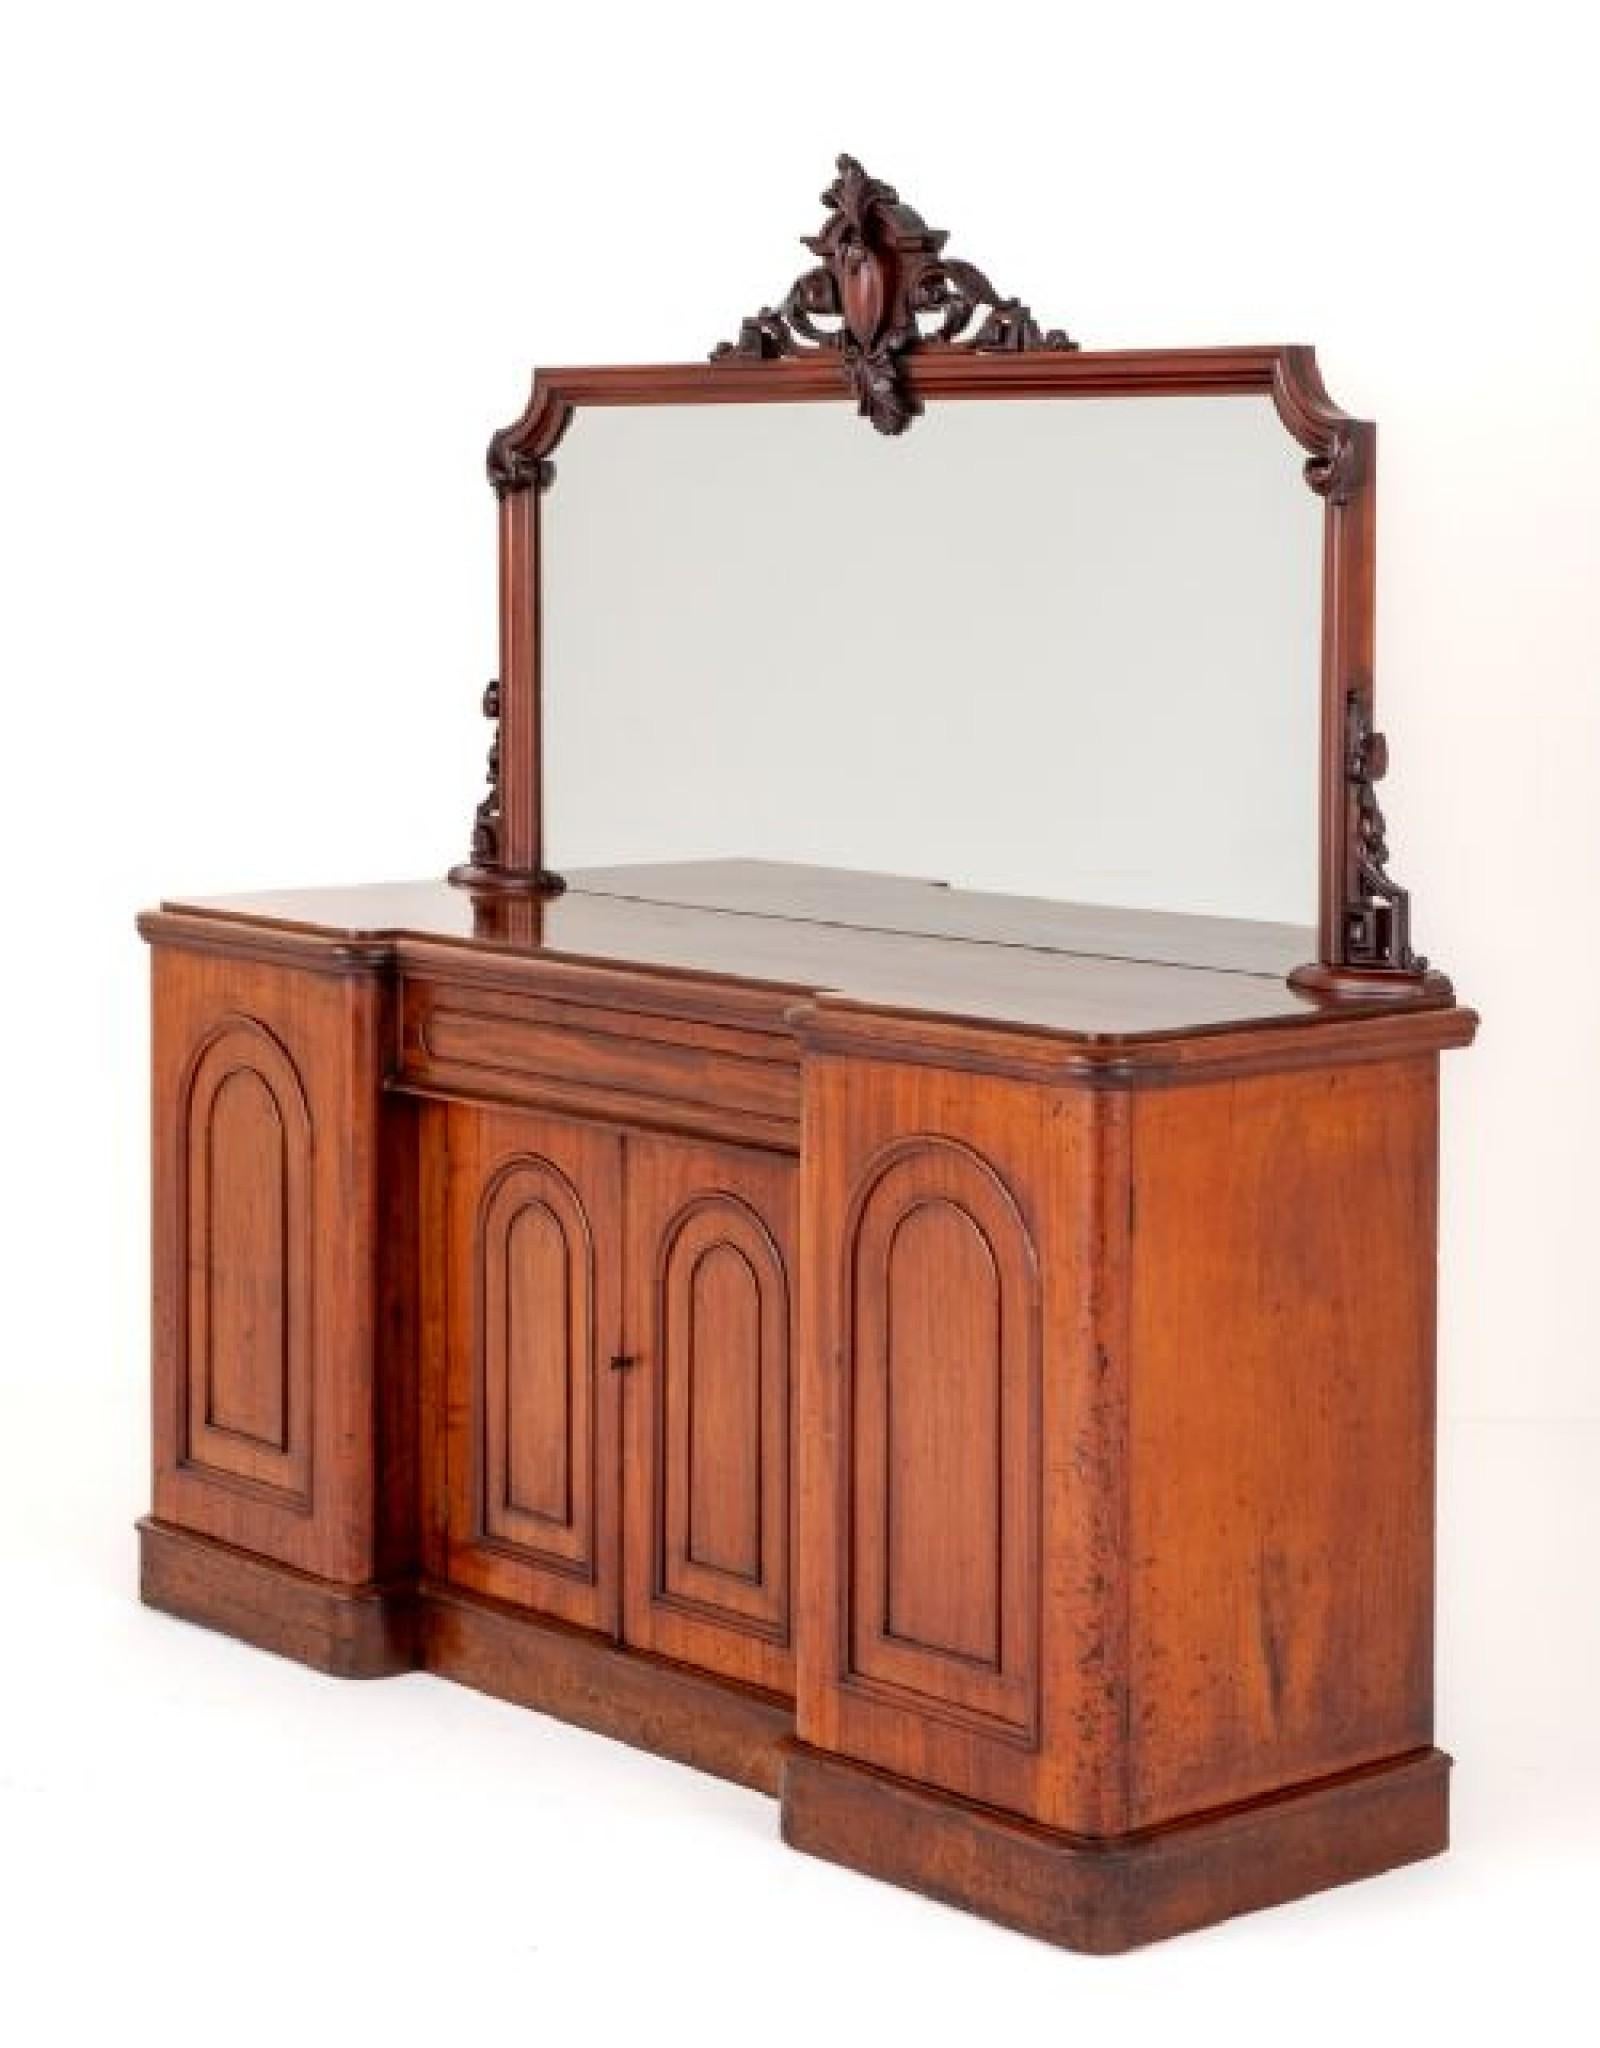 Mid-19th Century Victorian Mahogany Sideboard Antique Server, 1860 For Sale